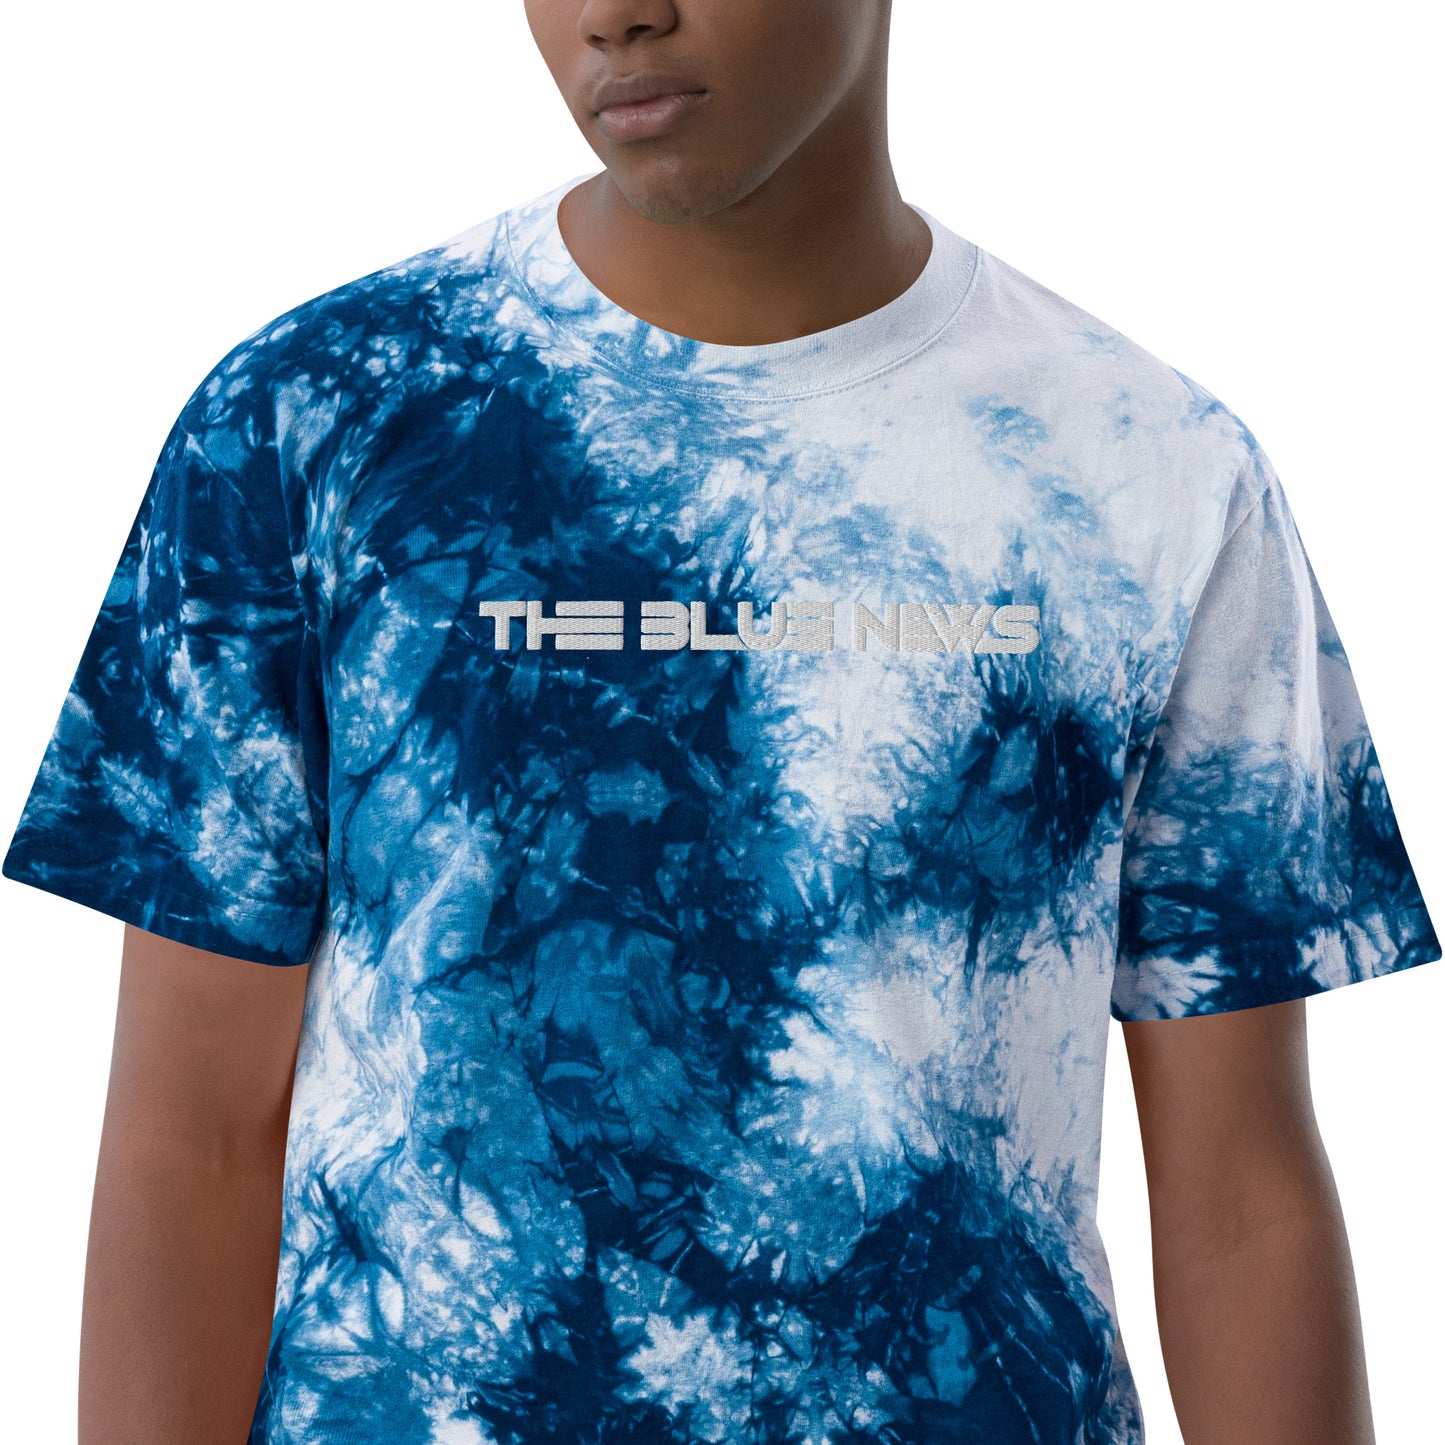 Oversized tie-dye t-shirt with embroidered band logo